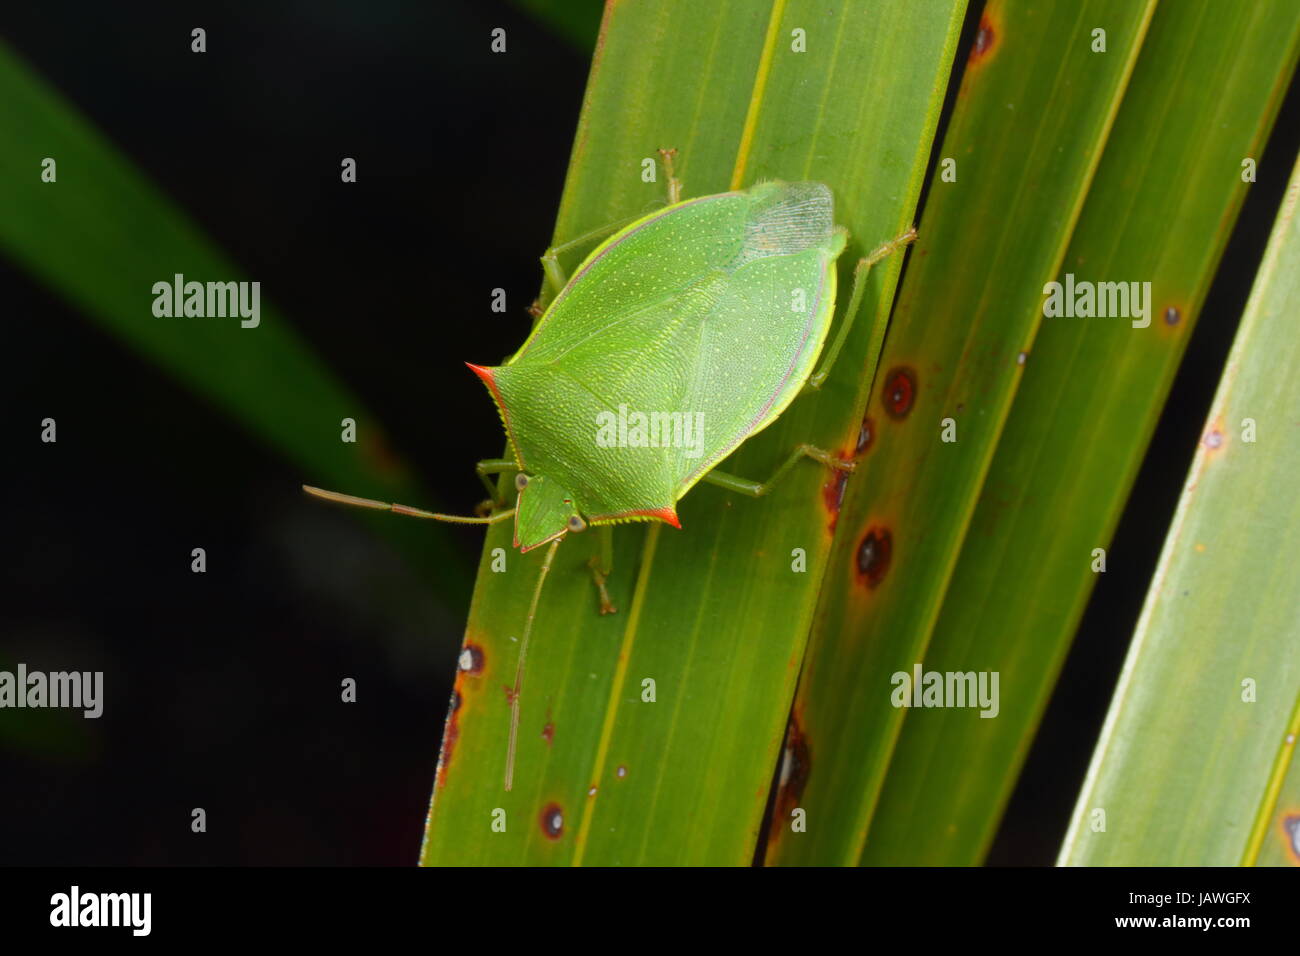 A spined green stink bug, Loxa flavicollis, crawling on a saw palmetto frond. Stock Photo